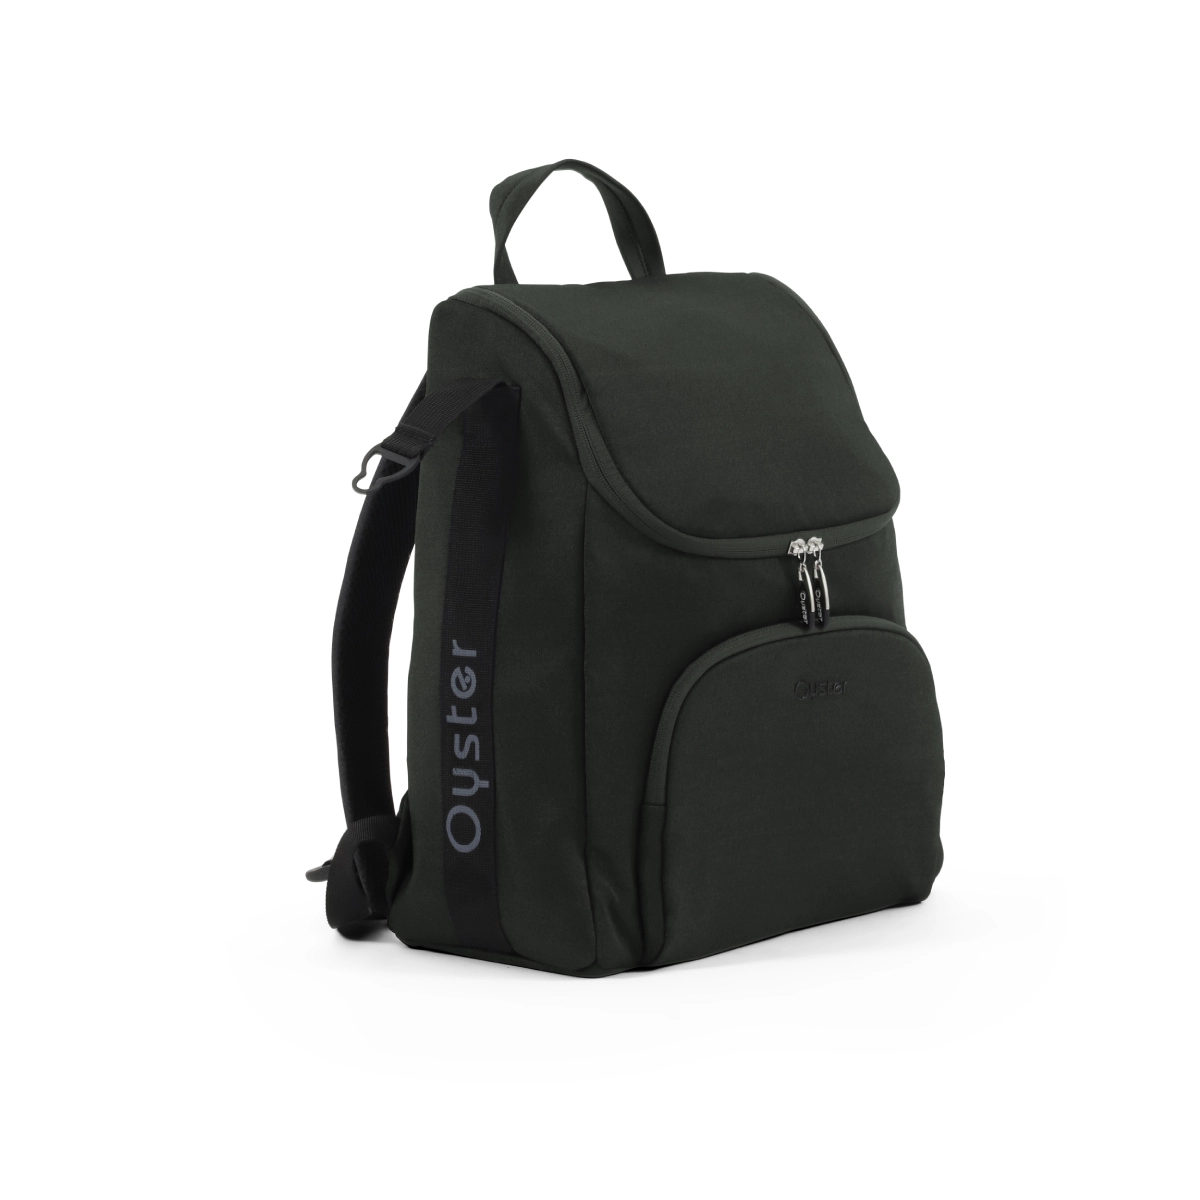 Babystyle Oyster 3 Changing Backpack